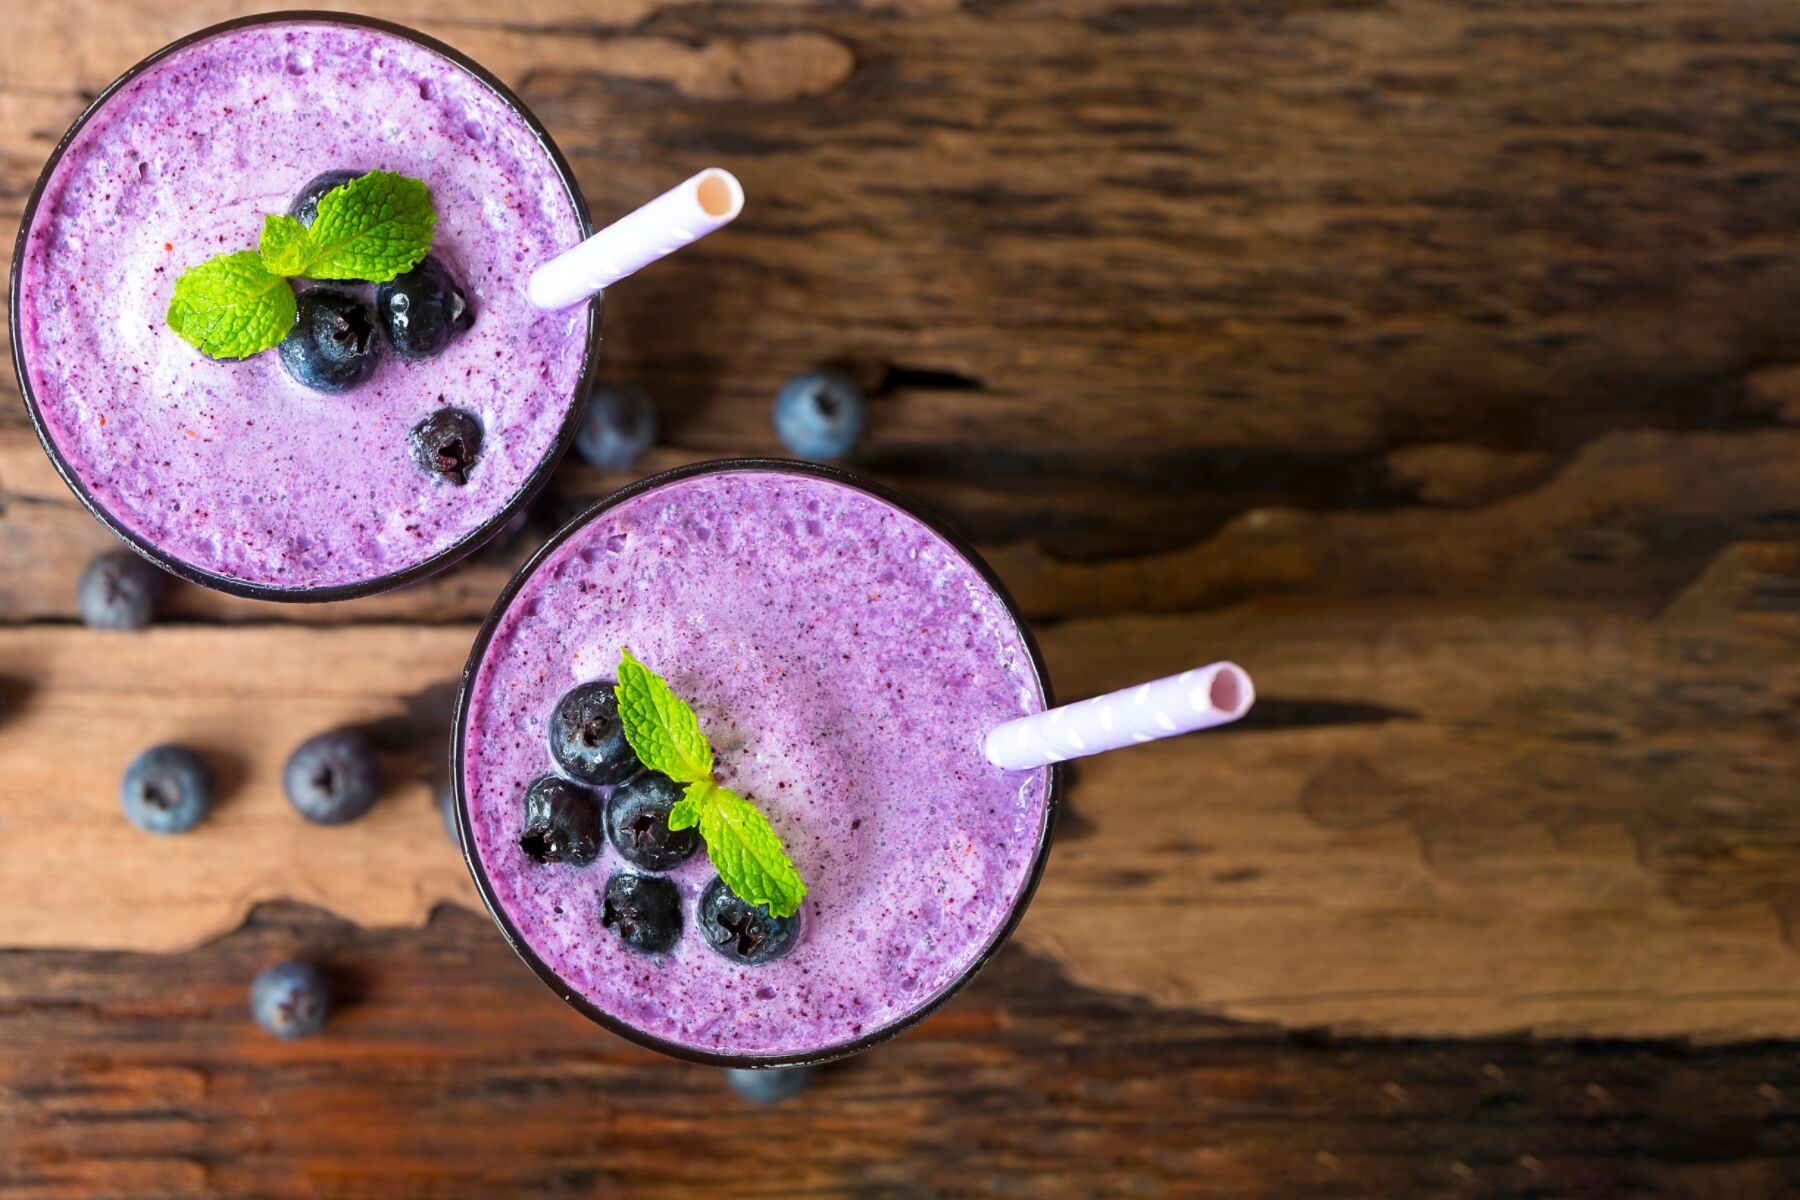 Our best Juicy blueberry & pineapple protein smoothie